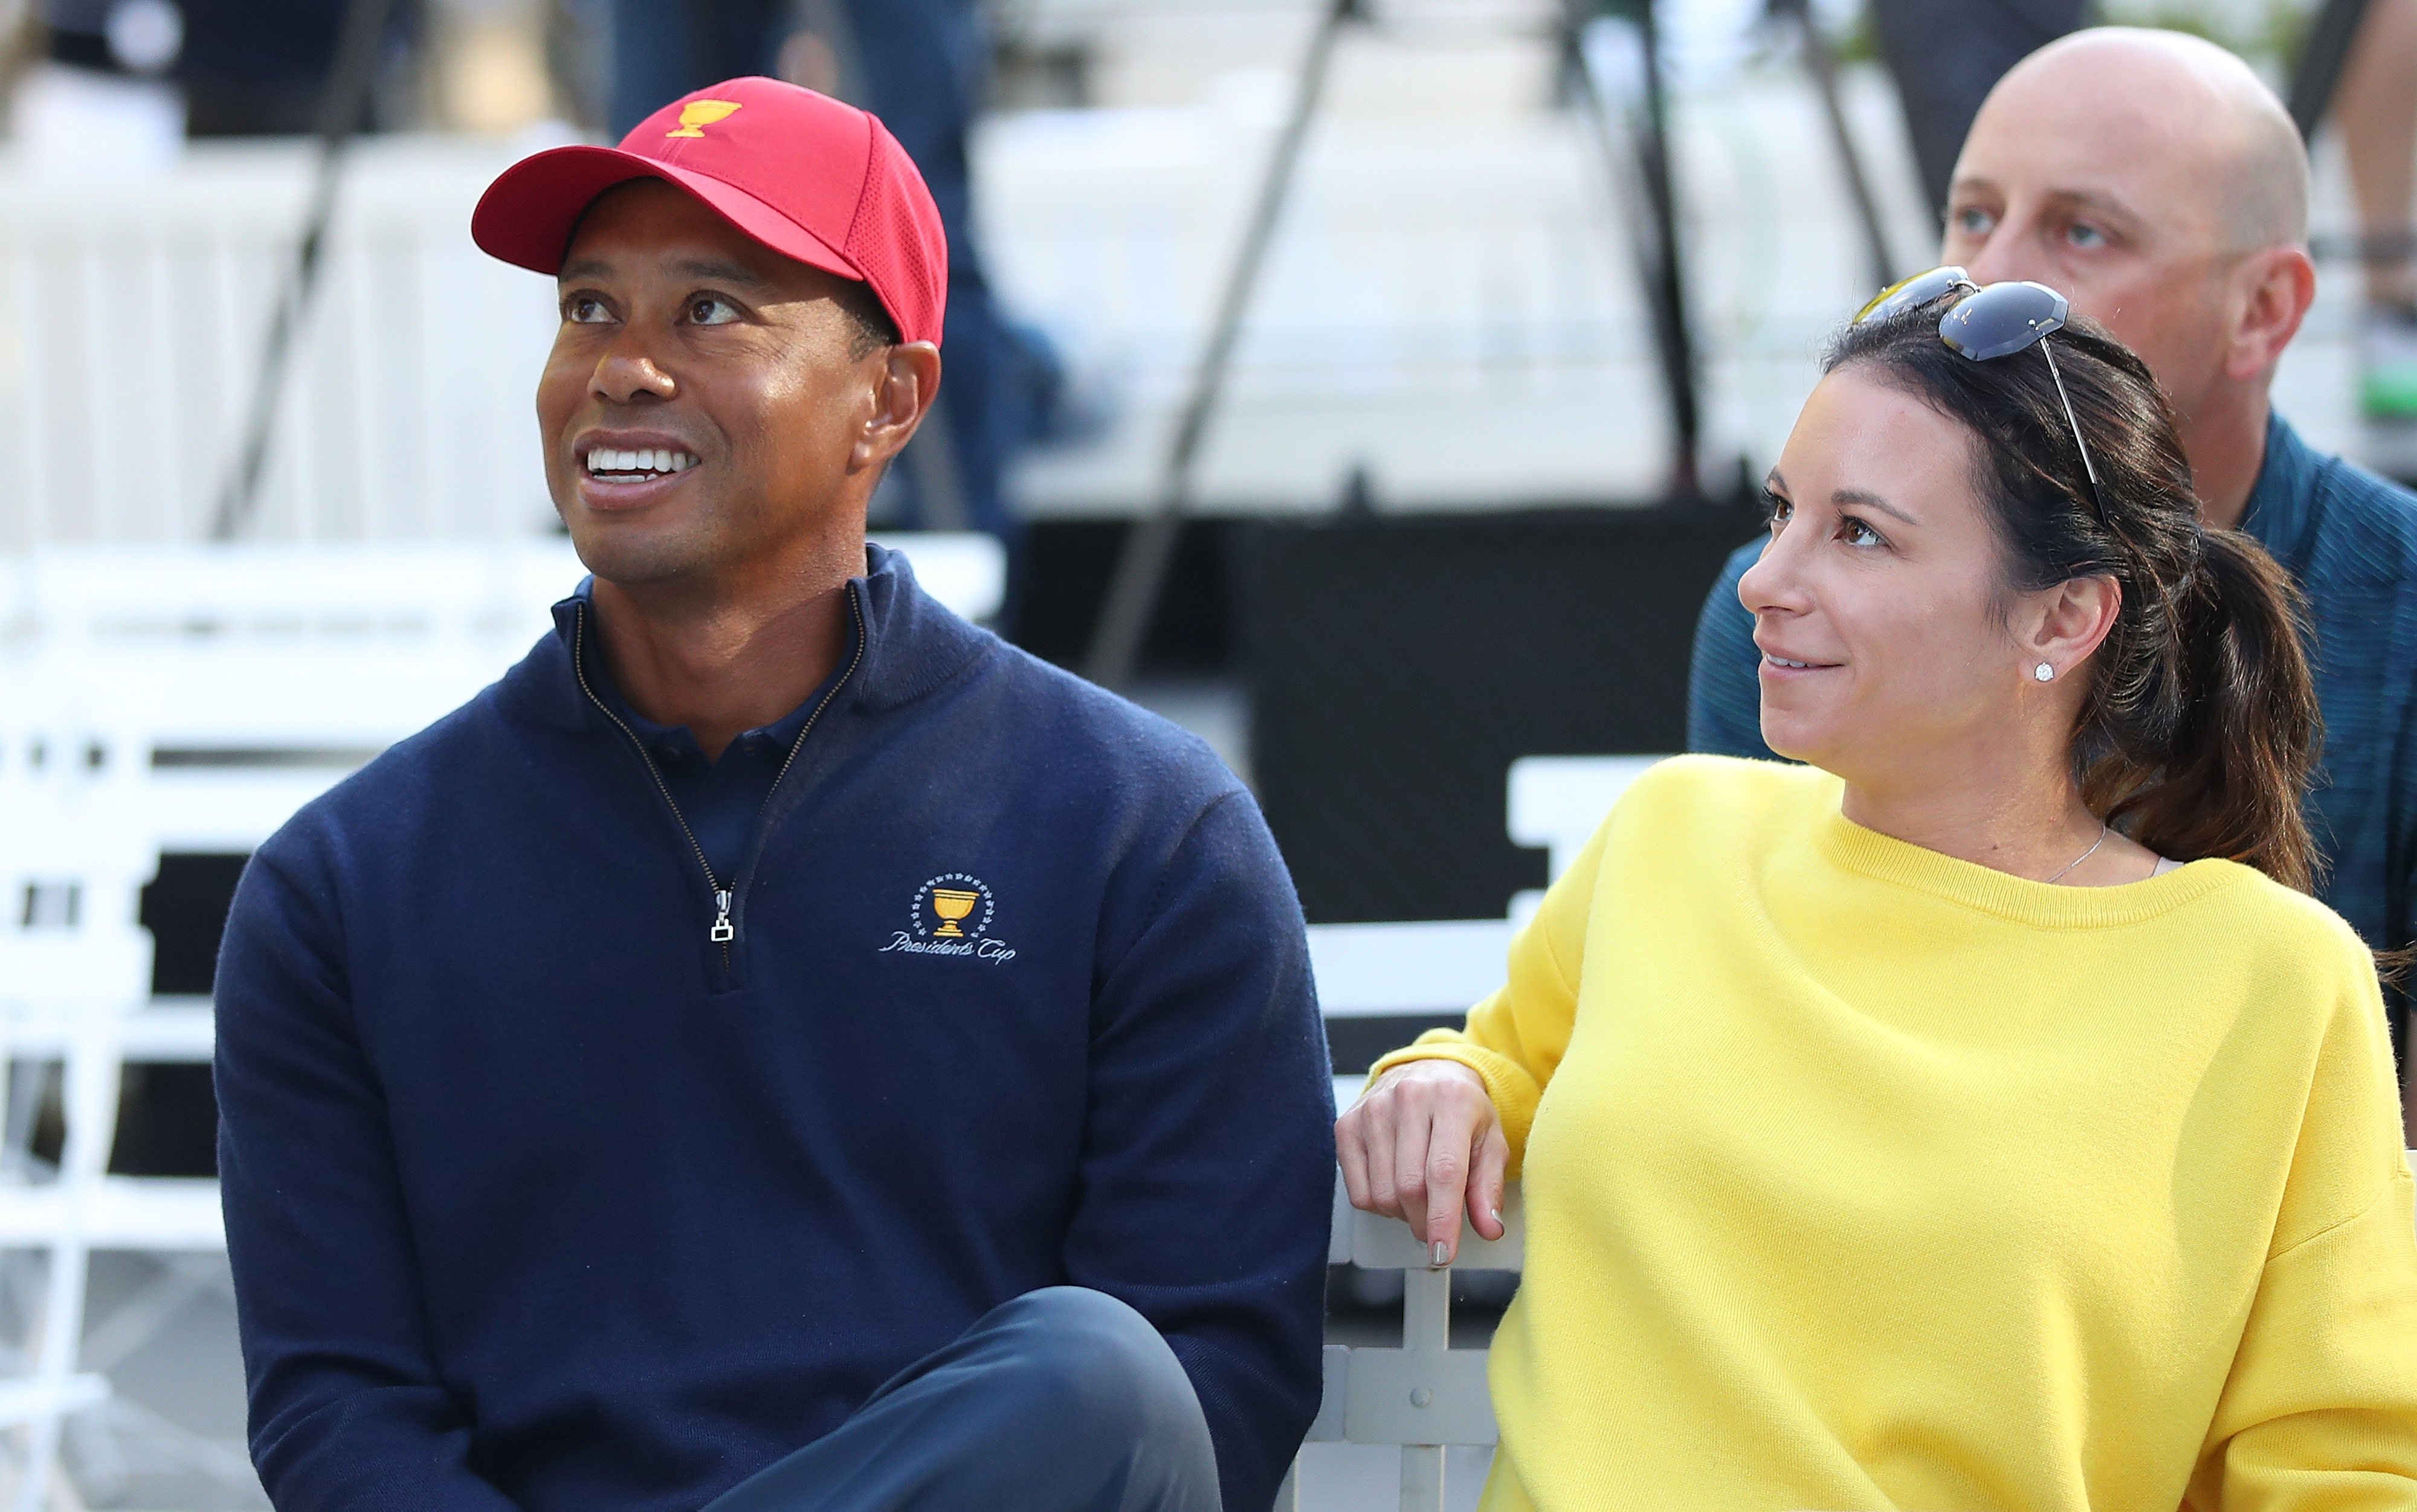 Tiger Woods and his girlfriend Erica Herman during the  Presidents Cup. December 5, 2018 in Melbourne, Australia. | Photo: GettyImages